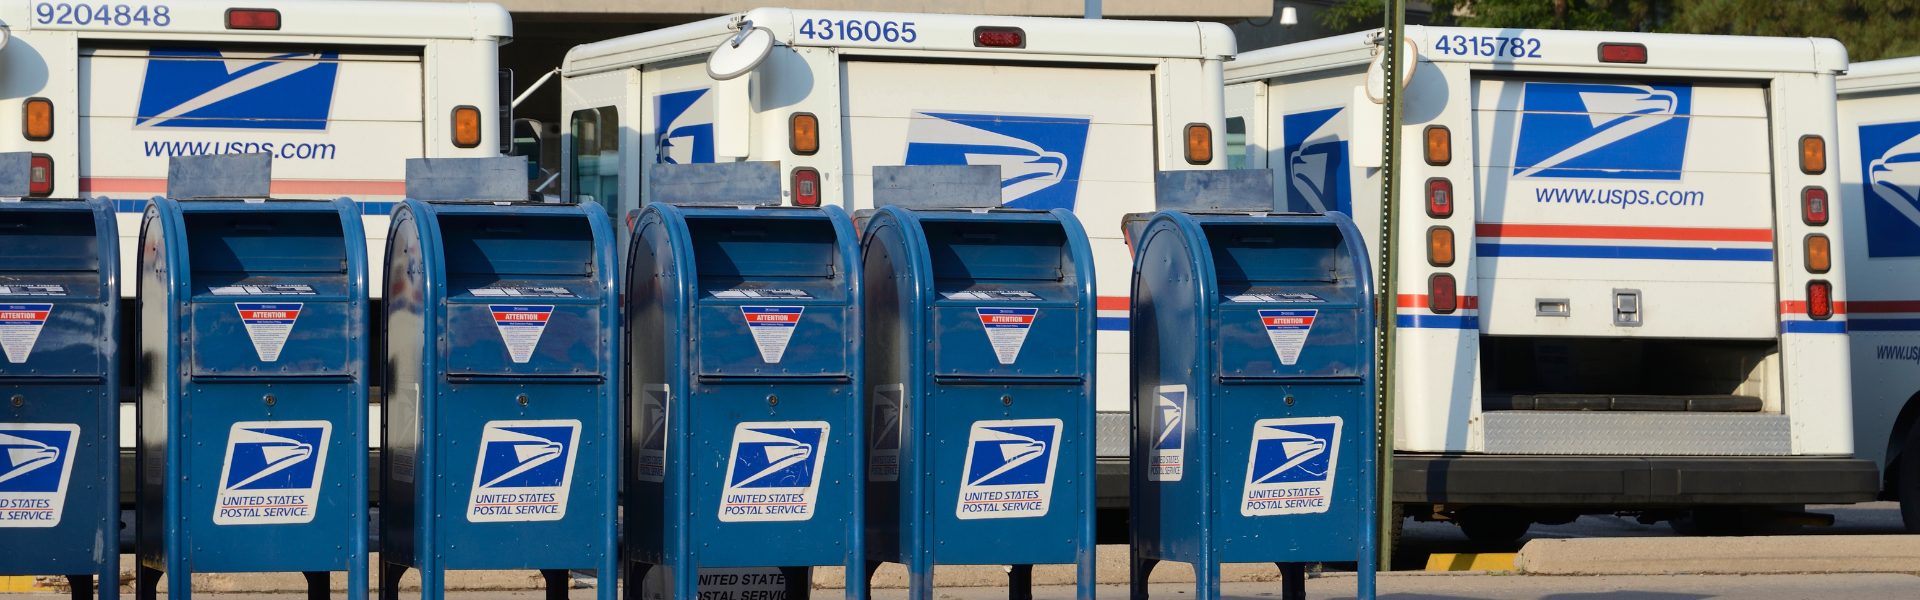 USPS Informed Delivery Facts & Benefits for Your Business!